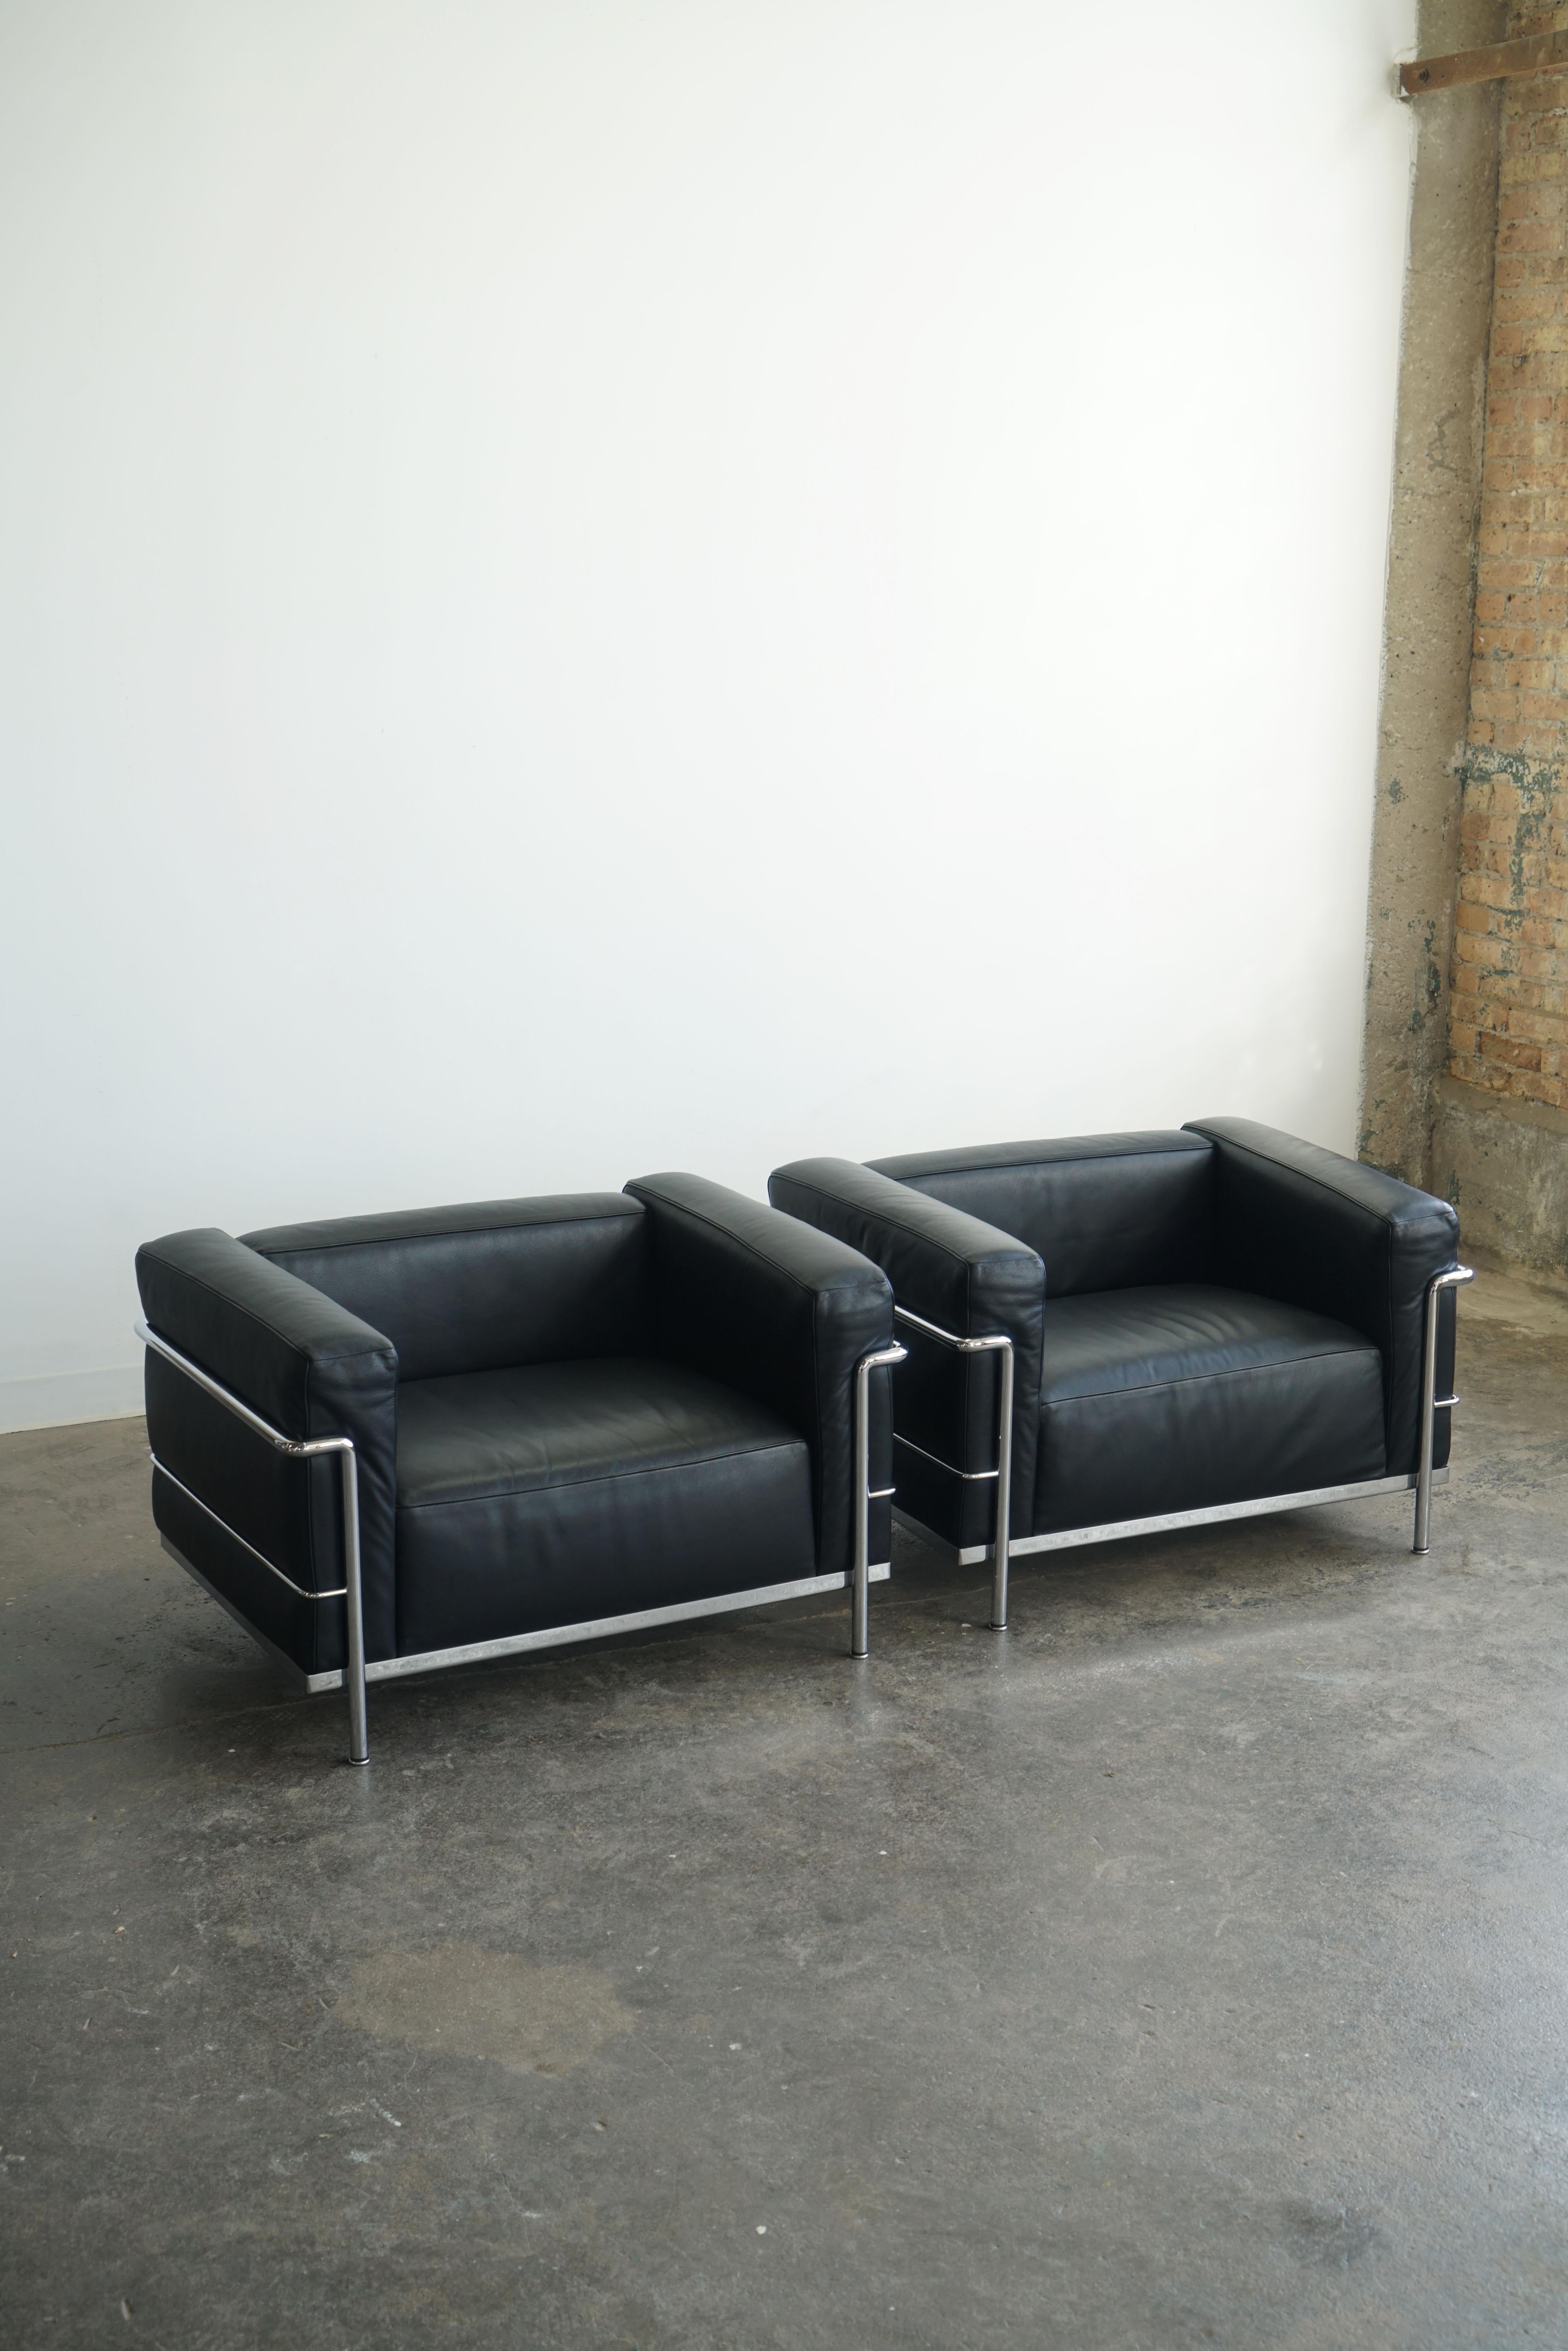 Pair of LC3 Grand Modele Armchairs for Cassina.
Black leather and chrome plated steel.
Newest production.
This pair has had very little use. 

One of the most iconic chairs, the LC3 was designed in 1928 by Le Corbusier, Pierre Jeanneret, and